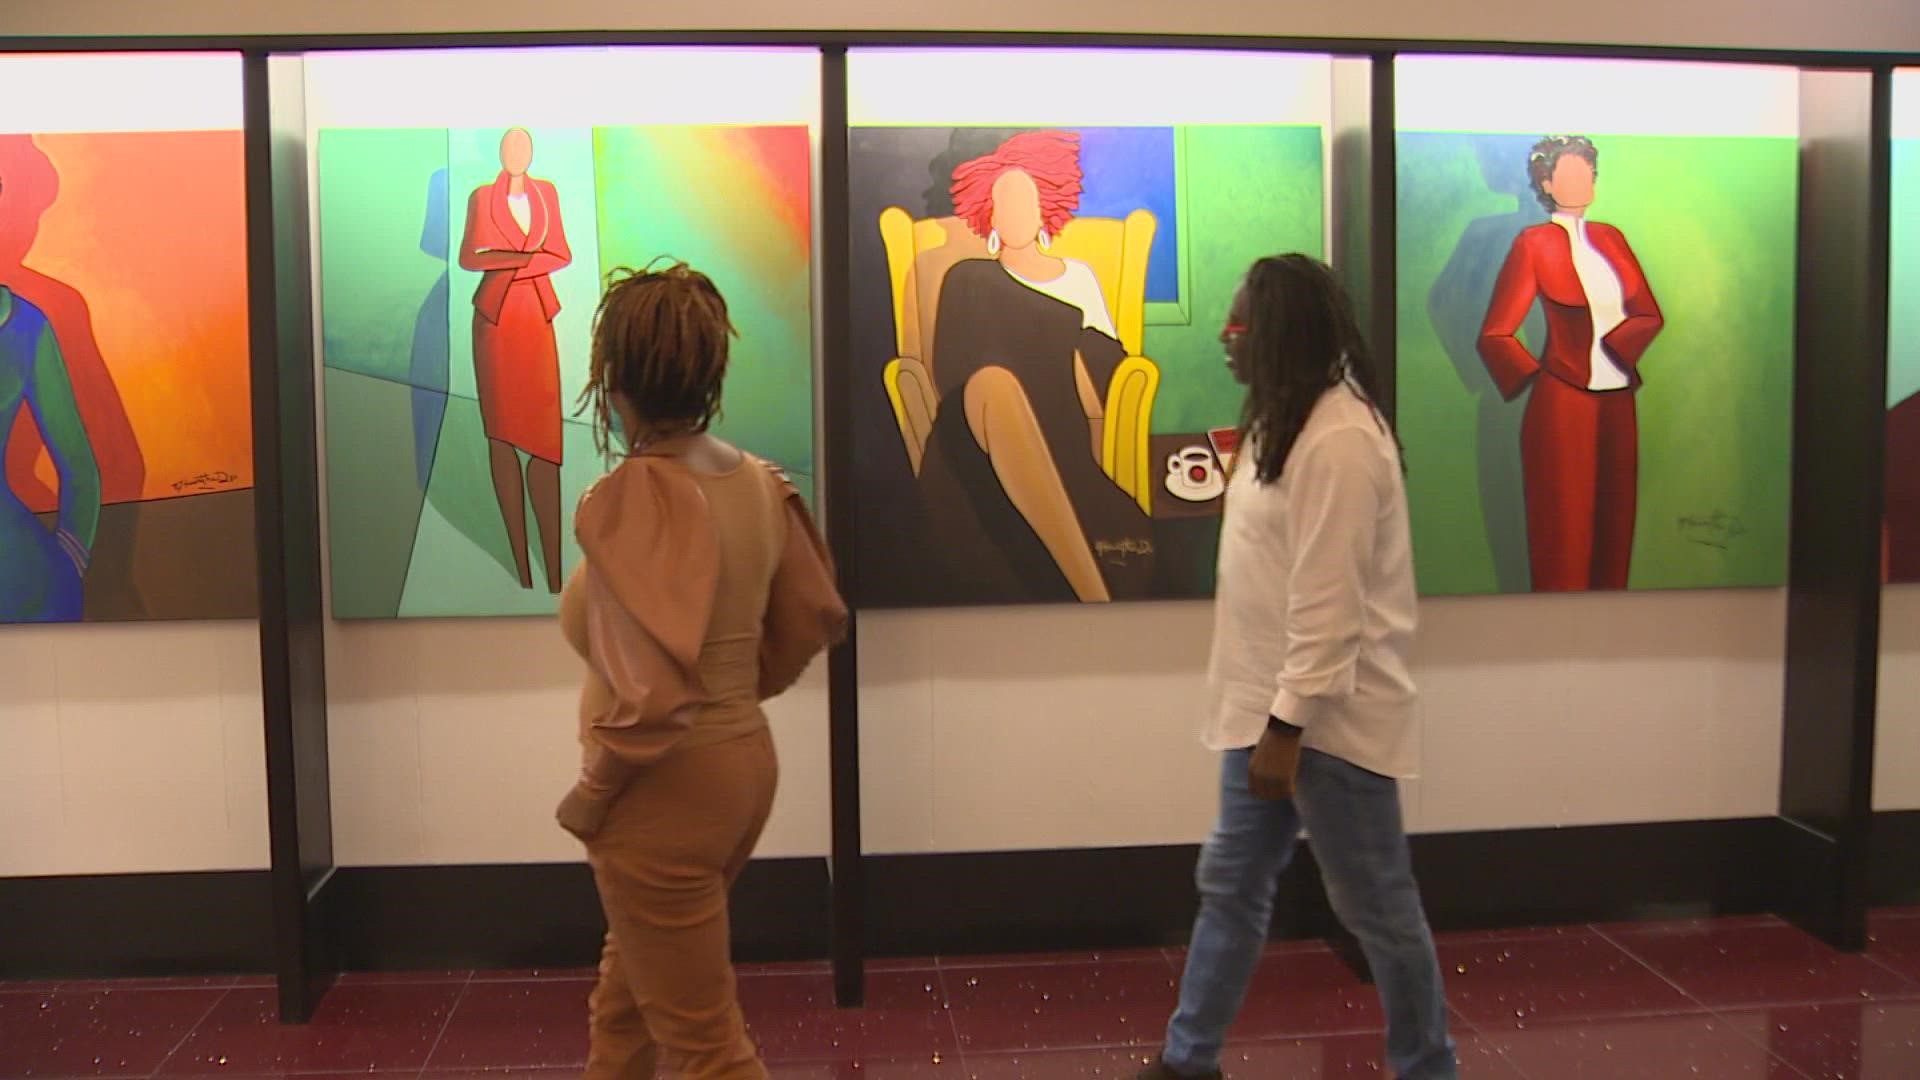 The Seattle area is rich in art with several places for viewing but few of them are Black-owned. WOW, Wonder of Women, features a Black art experience and more.